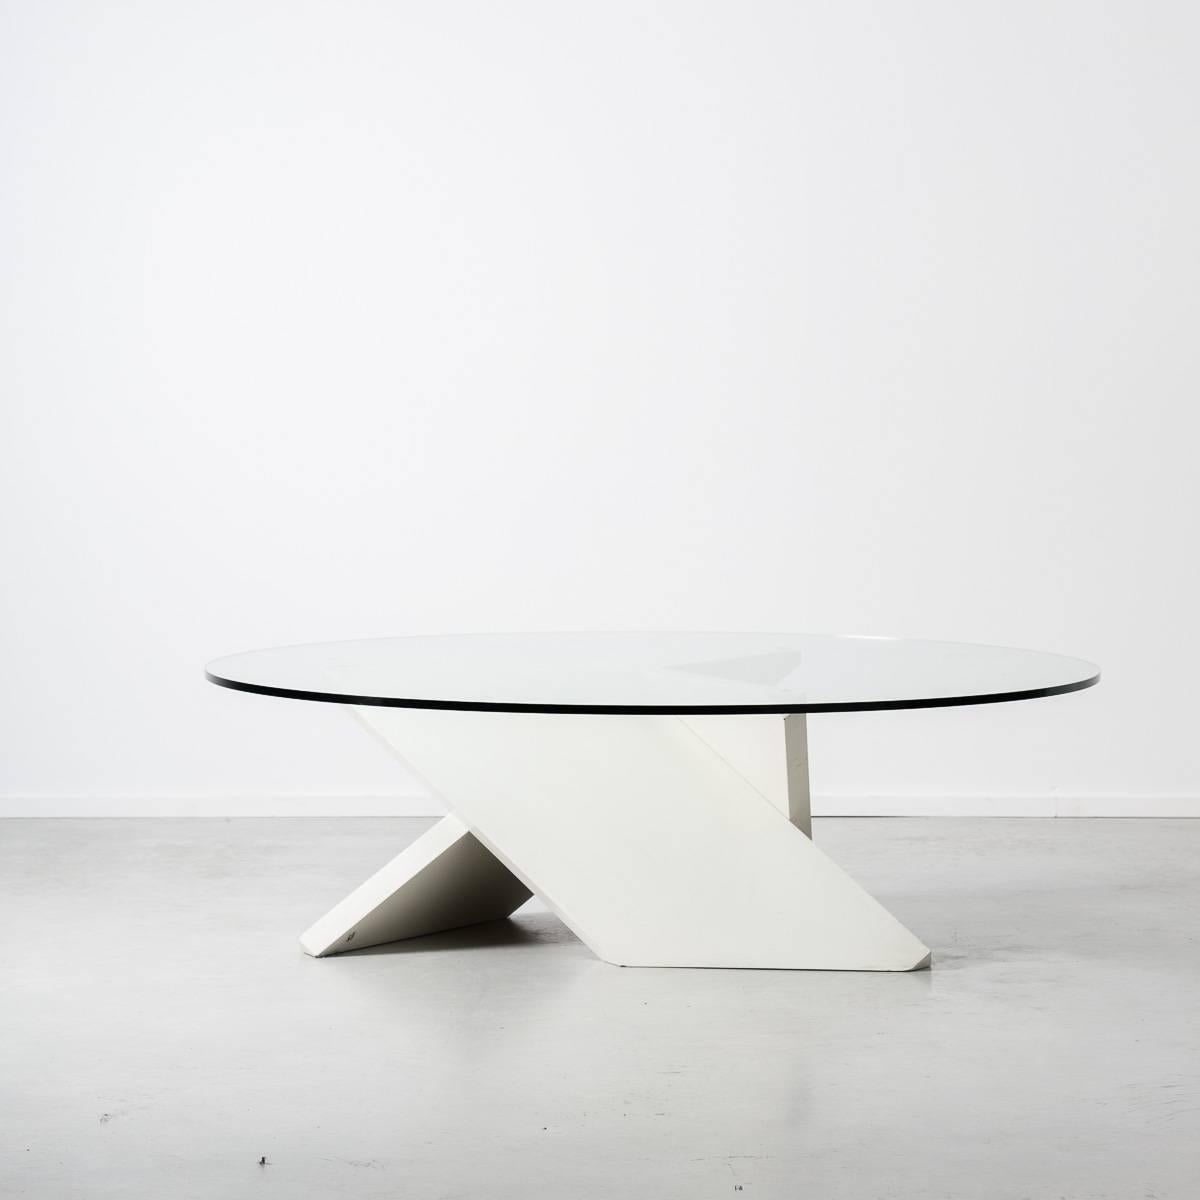 Glass round coffee table with heavy white geometric base. Postmodern era, sturdy construction in thick plate glass. Style reminiscent of Memphis and De Stijl schools of design.
 